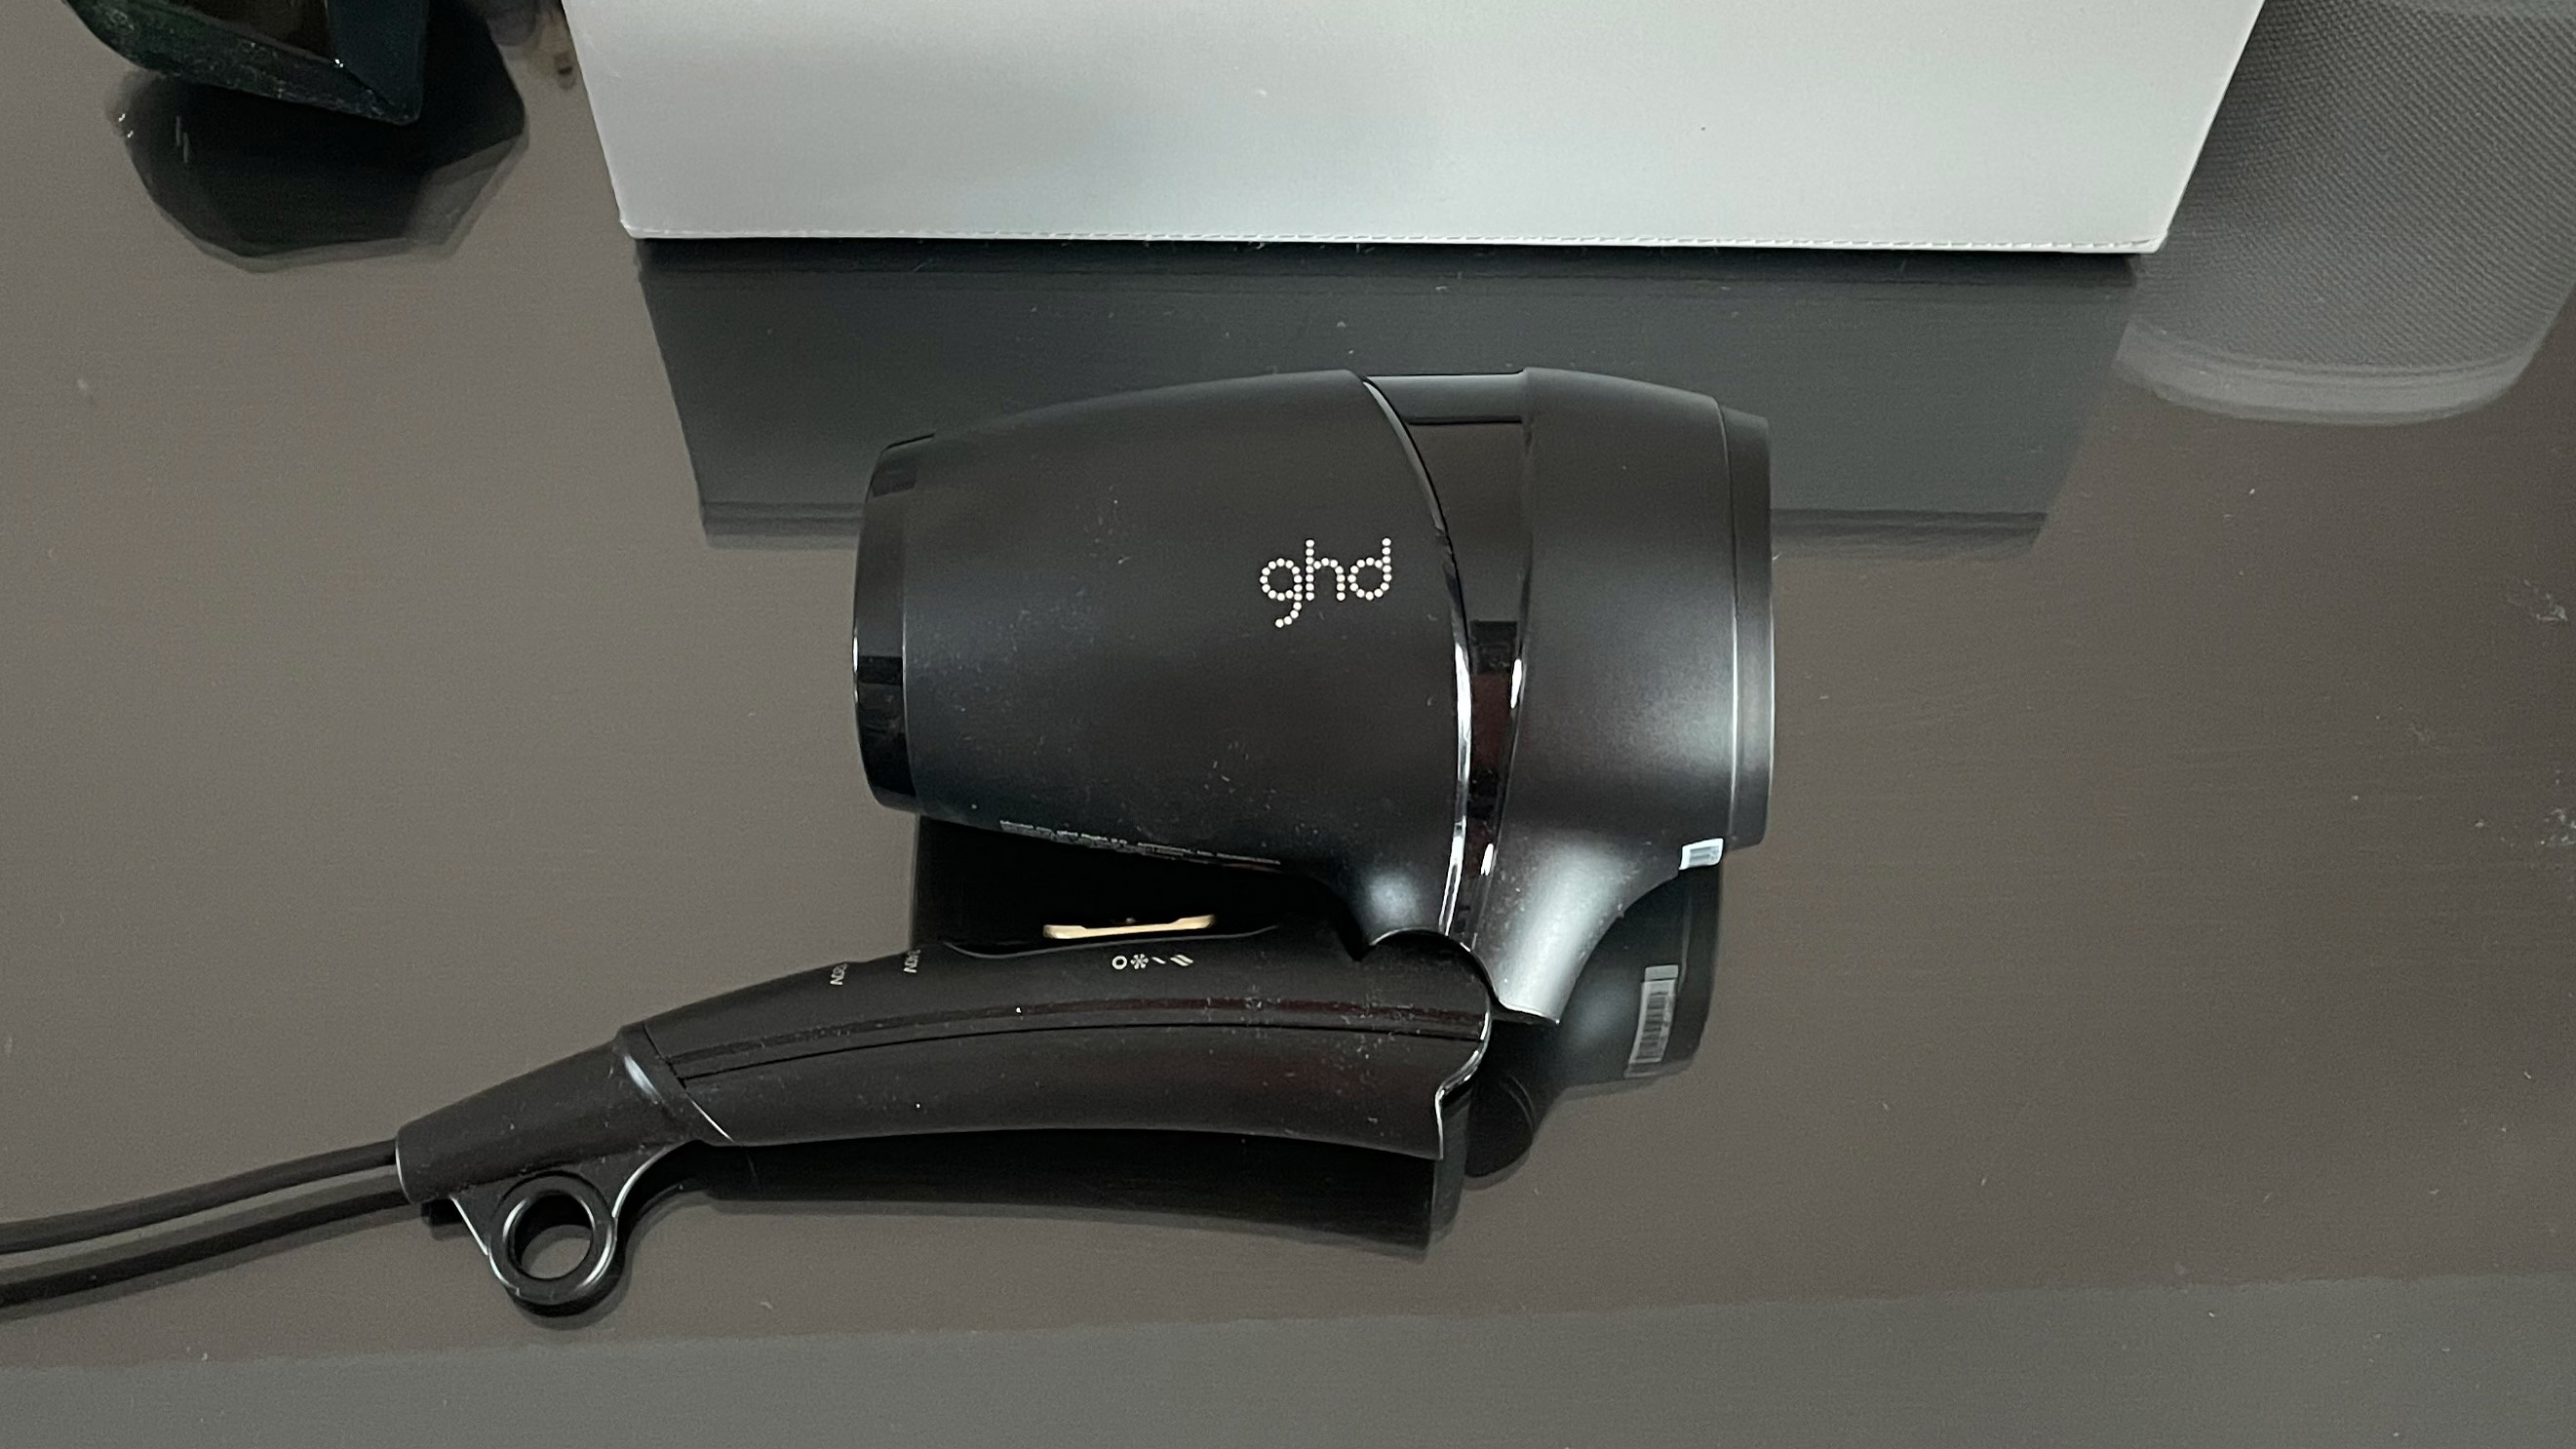 The GHD Flight folded up ready for travel